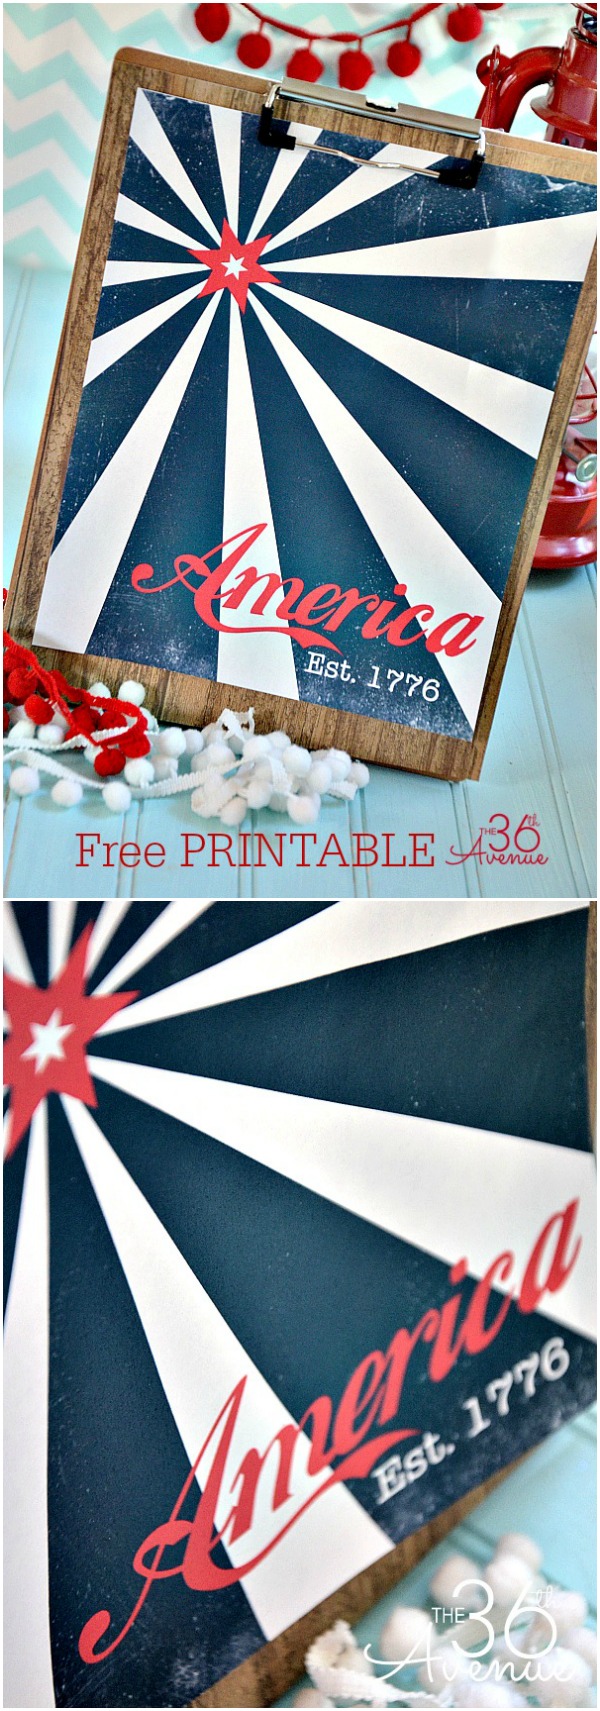 Fourth of July FREE PRINTABLE  at the36thavenue.com